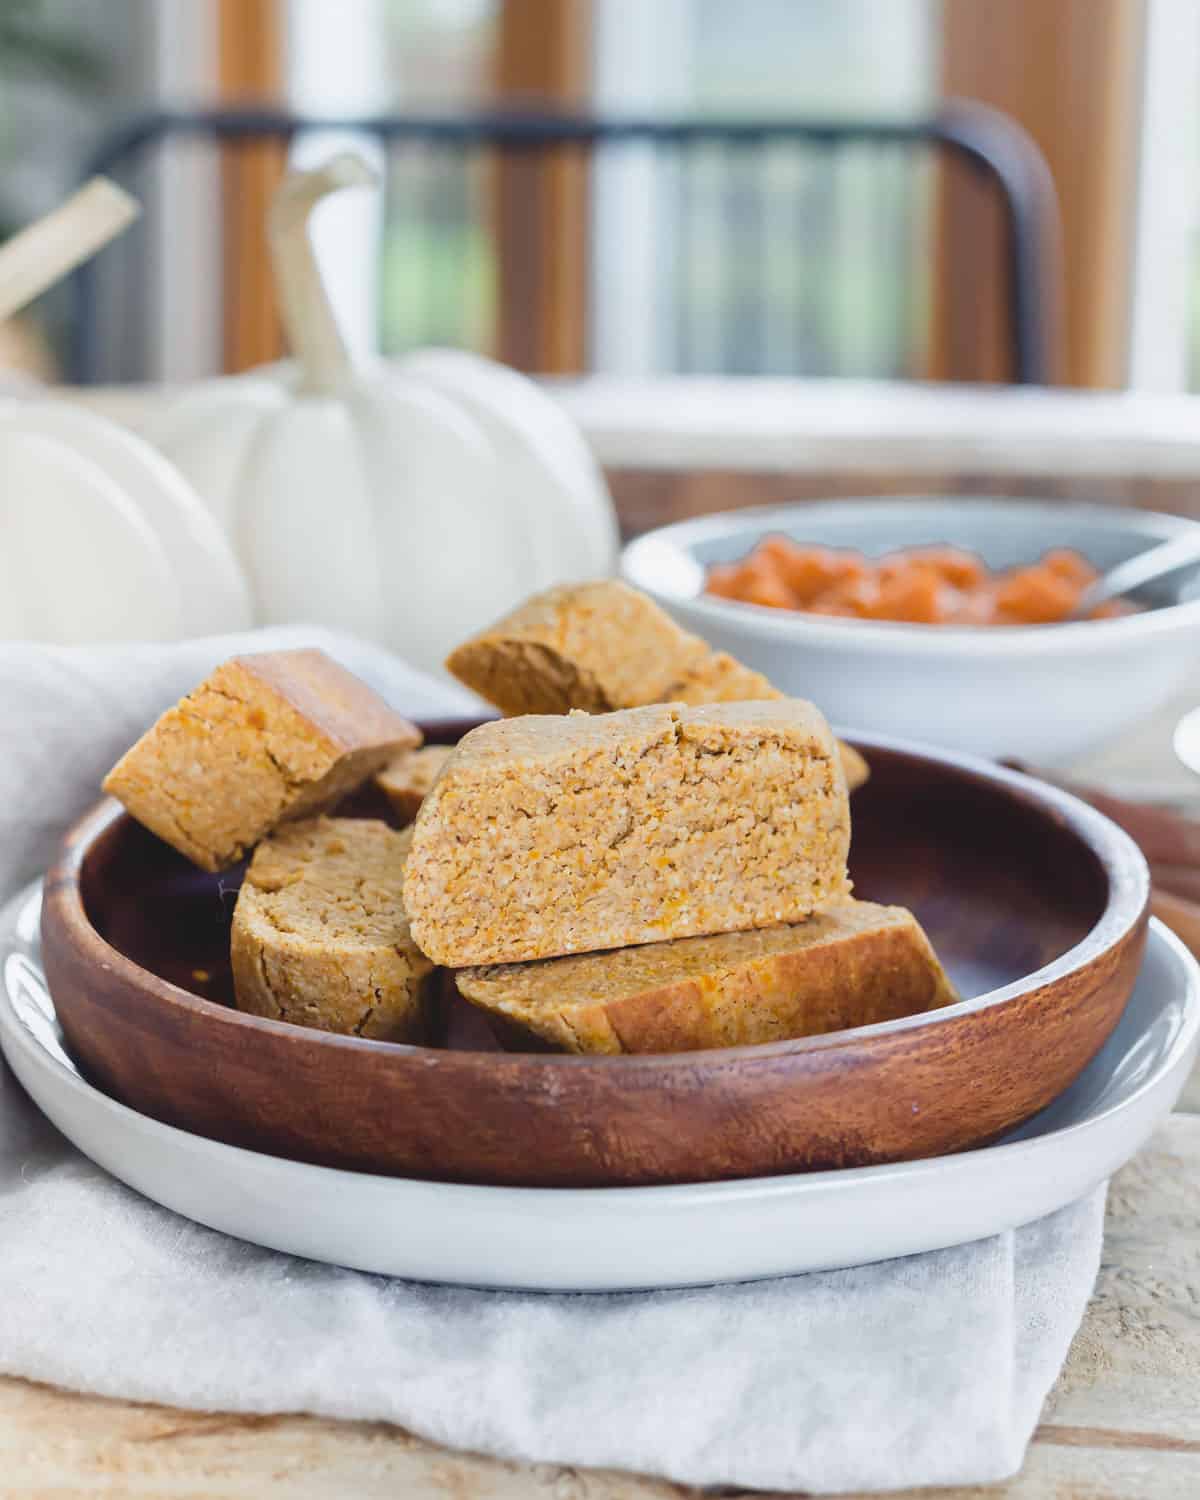 Pumpkin biscotti recipe on a plate atop a wooden table setting.